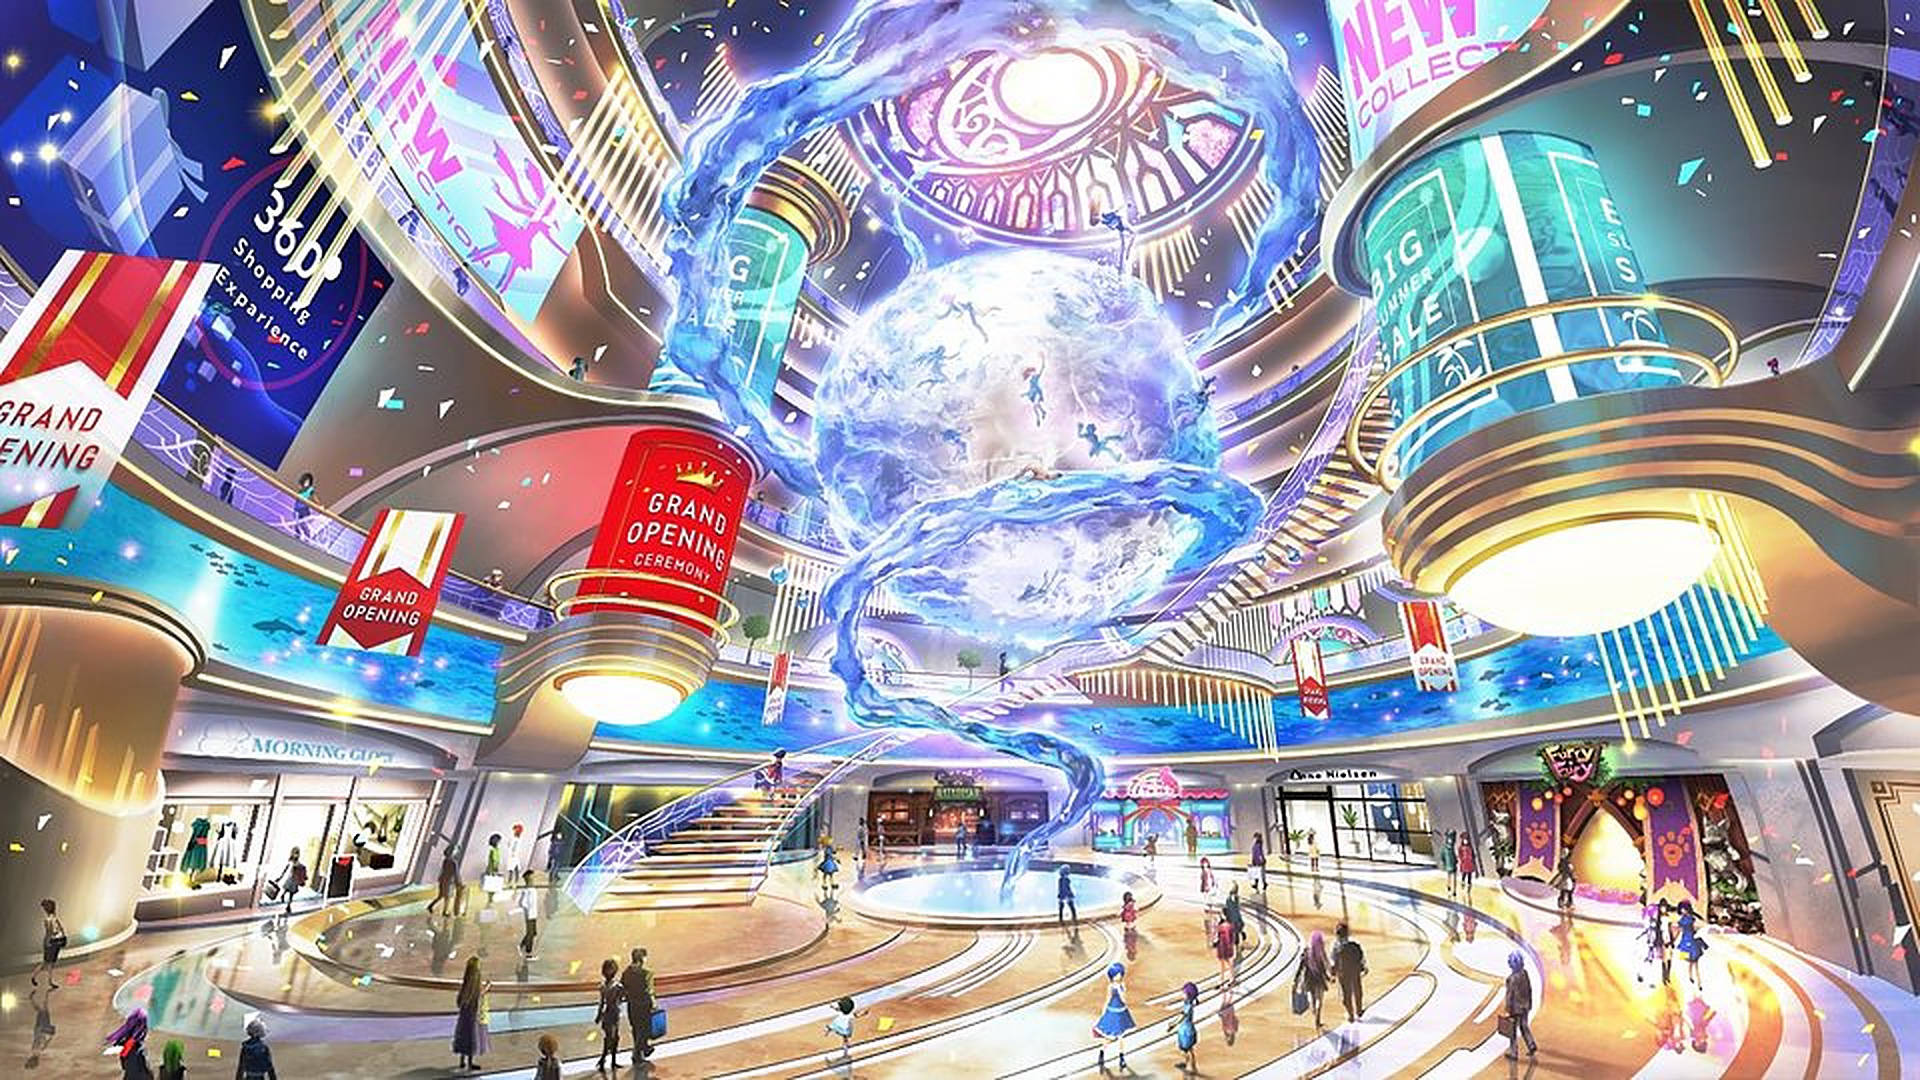 Colorful Digital Illustration Of A Shopping Mall